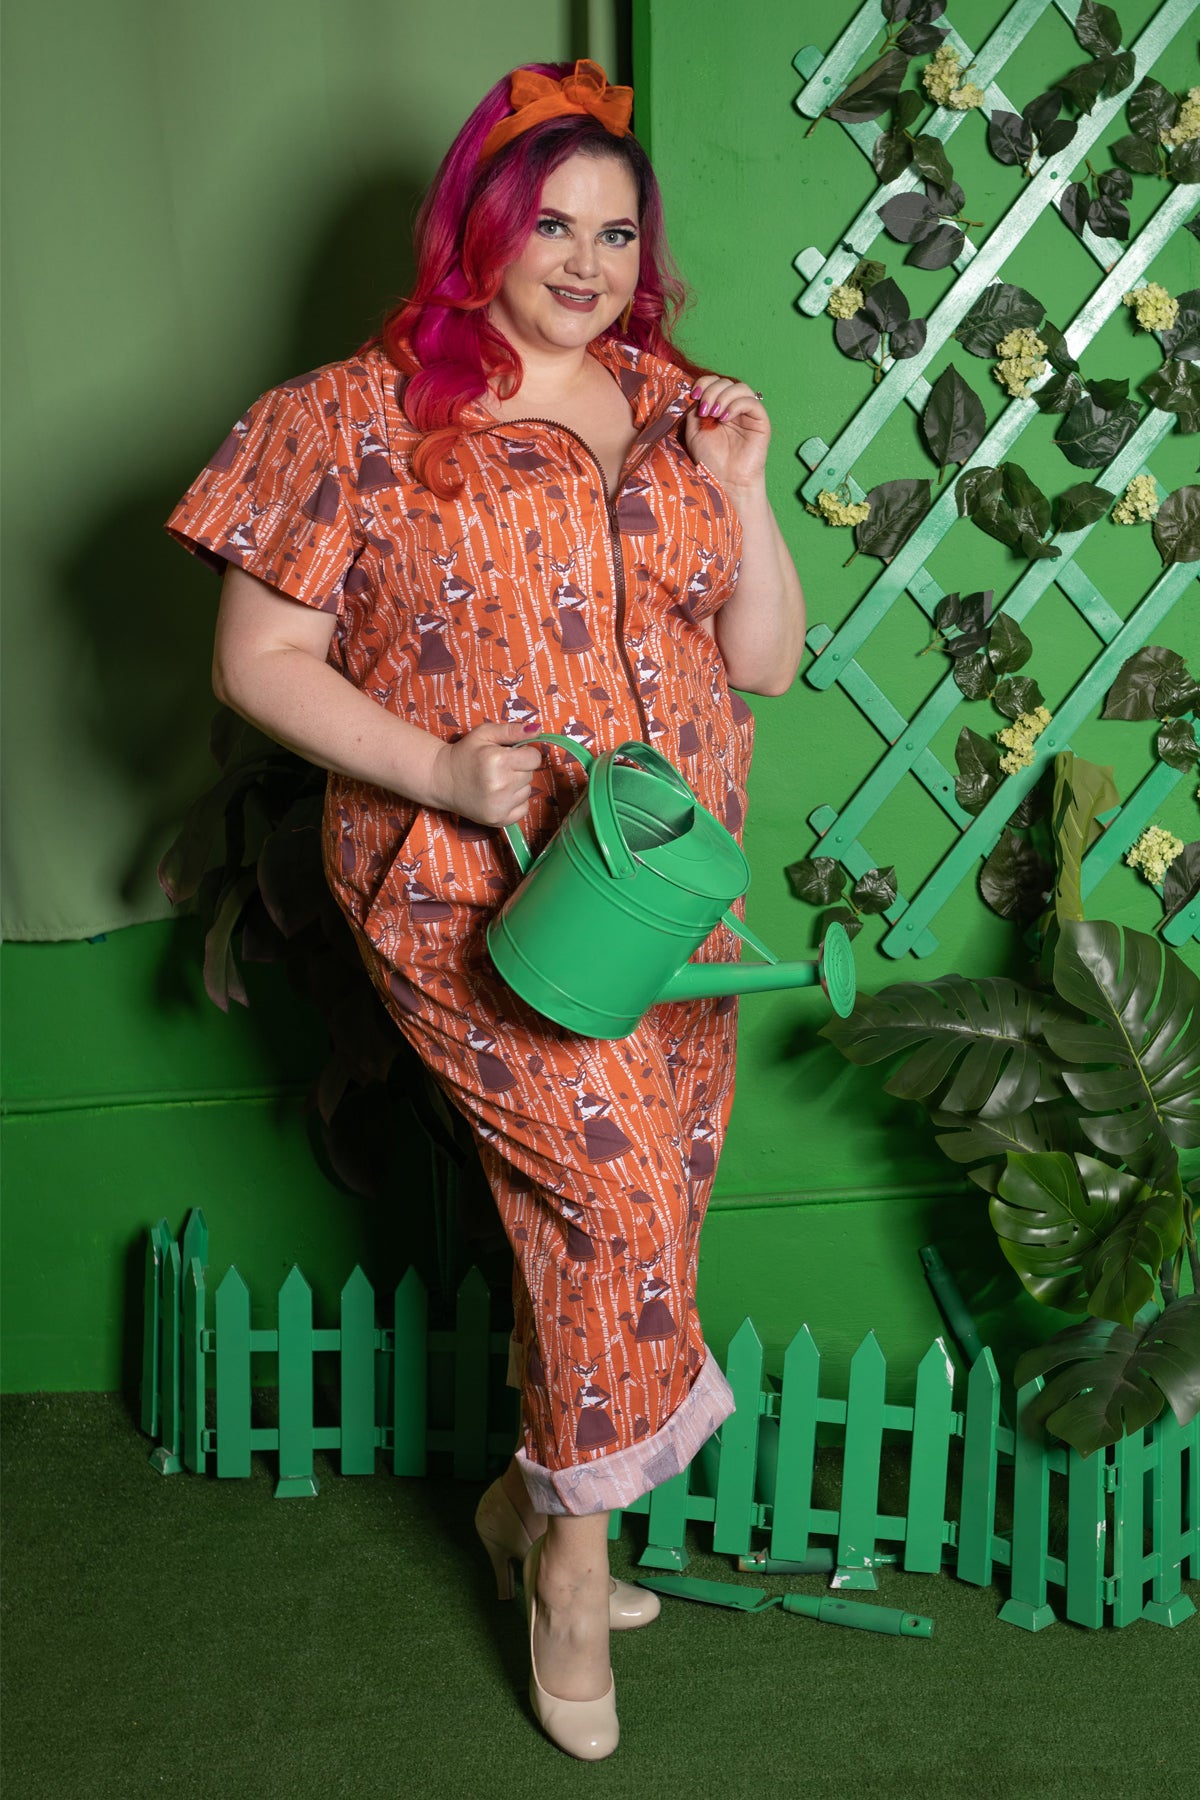 Fun young woman in orange and brown jumpsuits with pockets and printed with deer, girls and trees